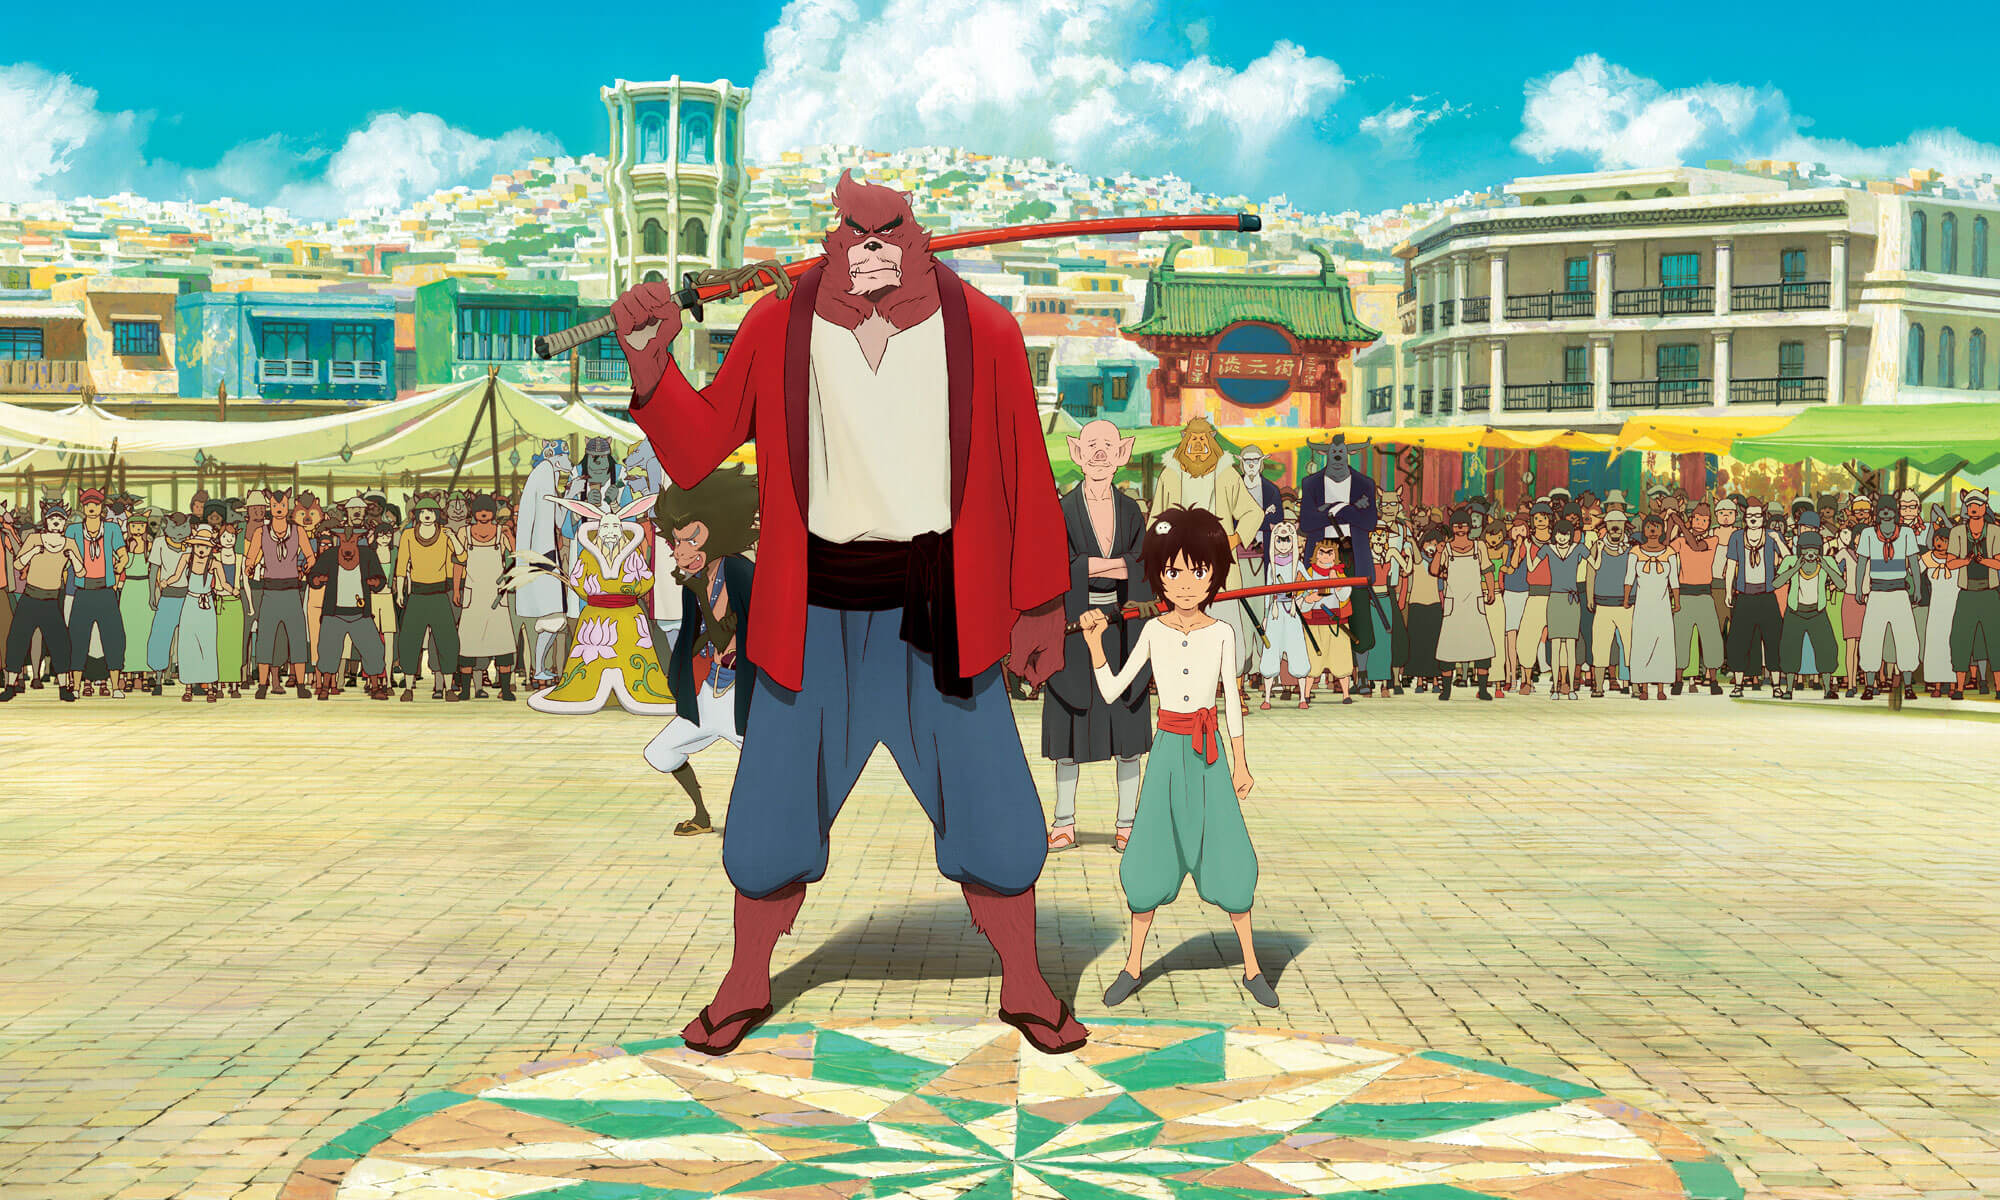 The Boy and the Beast is anime meets Disney